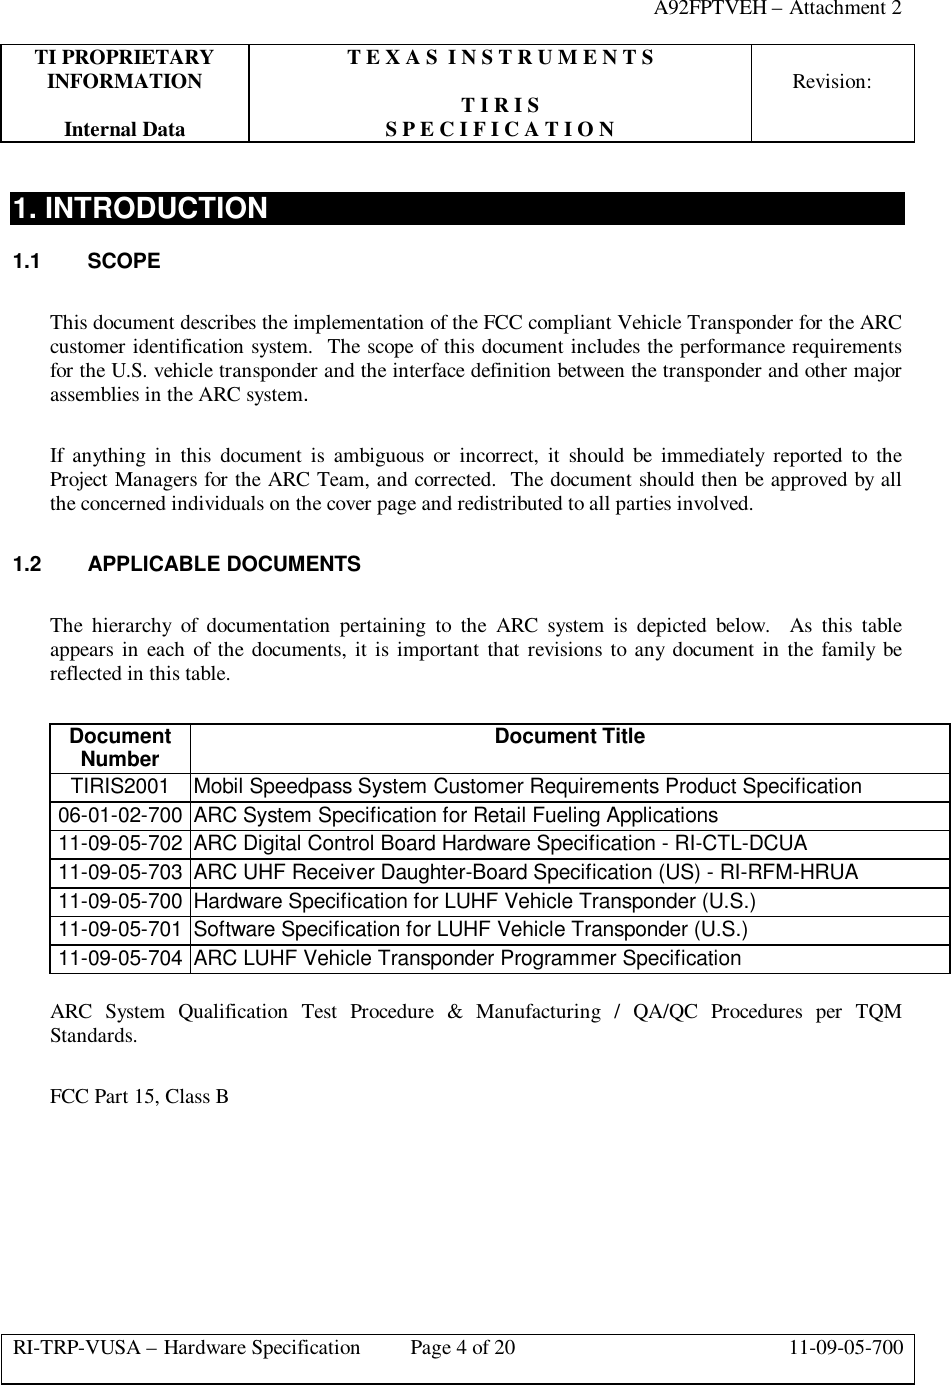 A92FPTVEH – Attachment 2TI PROPRIETARY T E X A S  I N S T R U M E N T SINFORMATION Revision:T I R I SInternal Data S P E C I F I C A T I O NRI-TRP-VUSA – Hardware Specification Page 4 of 20 11-09-05-7001. INTRODUCTION1.1 SCOPEThis document describes the implementation of the FCC compliant Vehicle Transponder for the ARCcustomer identification system.  The scope of this document includes the performance requirementsfor the U.S. vehicle transponder and the interface definition between the transponder and other majorassemblies in the ARC system.If anything in this document is ambiguous or incorrect, it should be immediately reported to theProject Managers for the ARC Team, and corrected.  The document should then be approved by allthe concerned individuals on the cover page and redistributed to all parties involved.1.2 APPLICABLE DOCUMENTSThe hierarchy of documentation pertaining to the ARC system is depicted below.  As this tableappears in each of the documents, it is important that revisions to any document in the family bereflected in this table.DocumentNumber Document TitleTIRIS2001 Mobil Speedpass System Customer Requirements Product Specification06-01-02-700 ARC System Specification for Retail Fueling Applications11-09-05-702 ARC Digital Control Board Hardware Specification - RI-CTL-DCUA11-09-05-703 ARC UHF Receiver Daughter-Board Specification (US) - RI-RFM-HRUA11-09-05-700 Hardware Specification for LUHF Vehicle Transponder (U.S.)11-09-05-701 Software Specification for LUHF Vehicle Transponder (U.S.)11-09-05-704 ARC LUHF Vehicle Transponder Programmer SpecificationARC System Qualification Test Procedure &amp; Manufacturing / QA/QC Procedures per TQMStandards.FCC Part 15, Class B